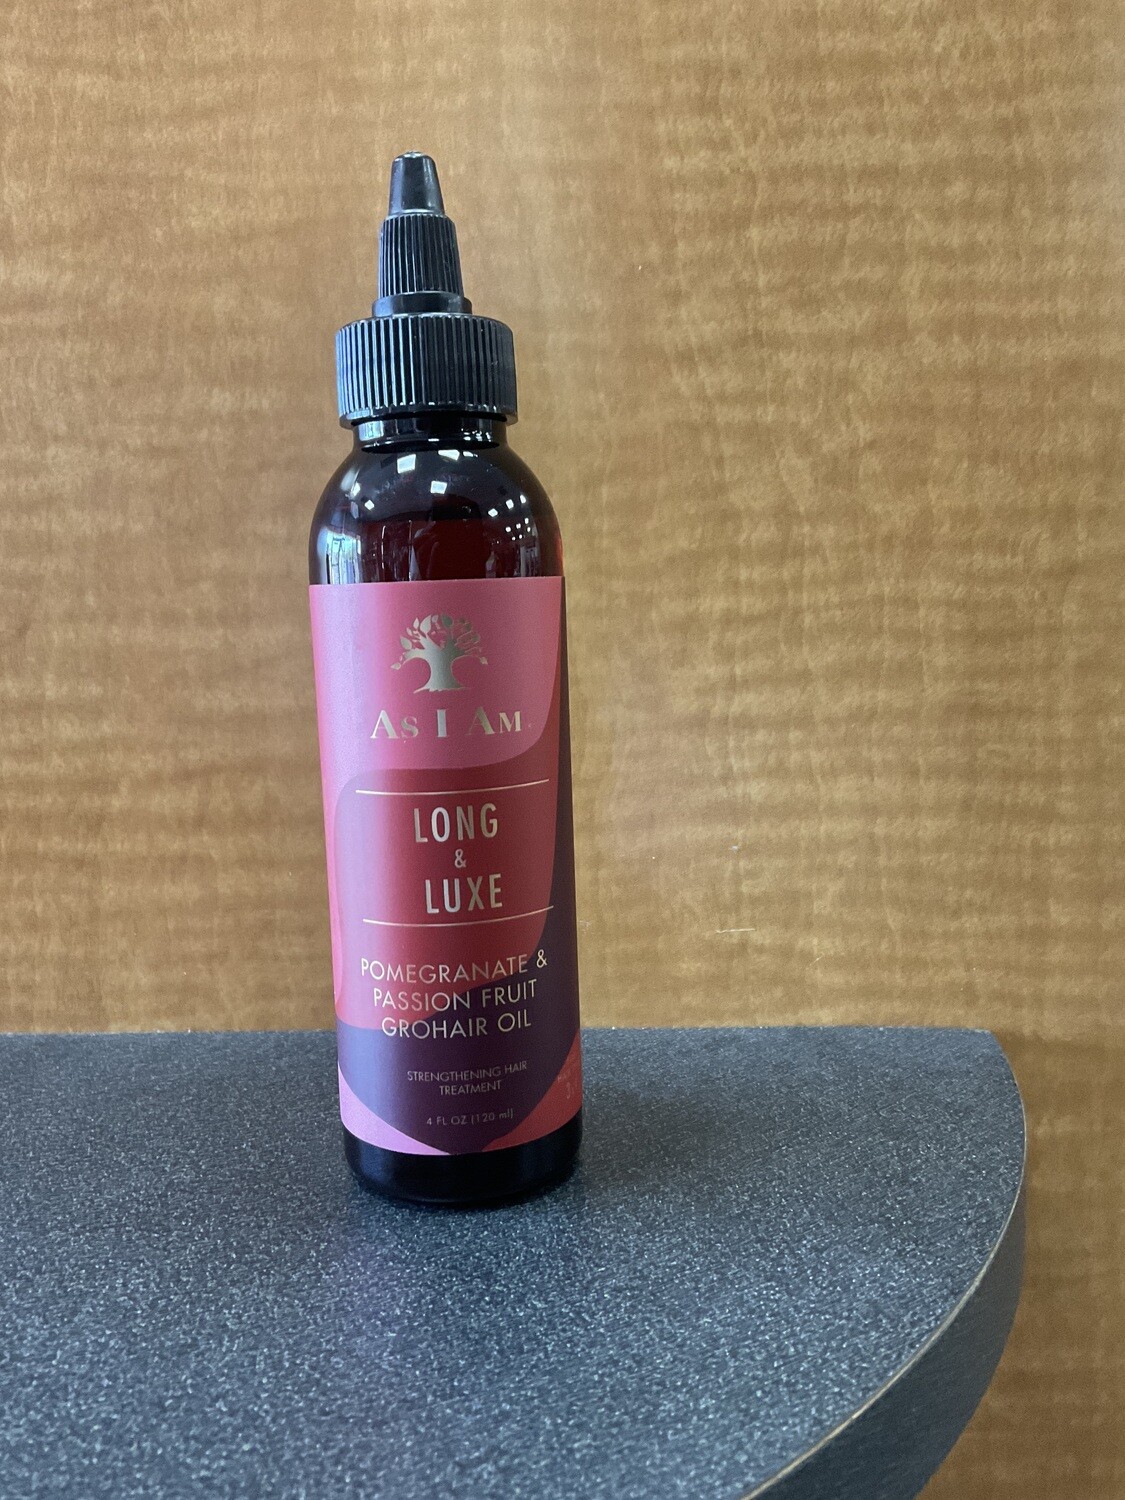 As I am Long &amp; Luxe Pomegranate &amp; Passion Fruit Grohair Oil 4 oz.